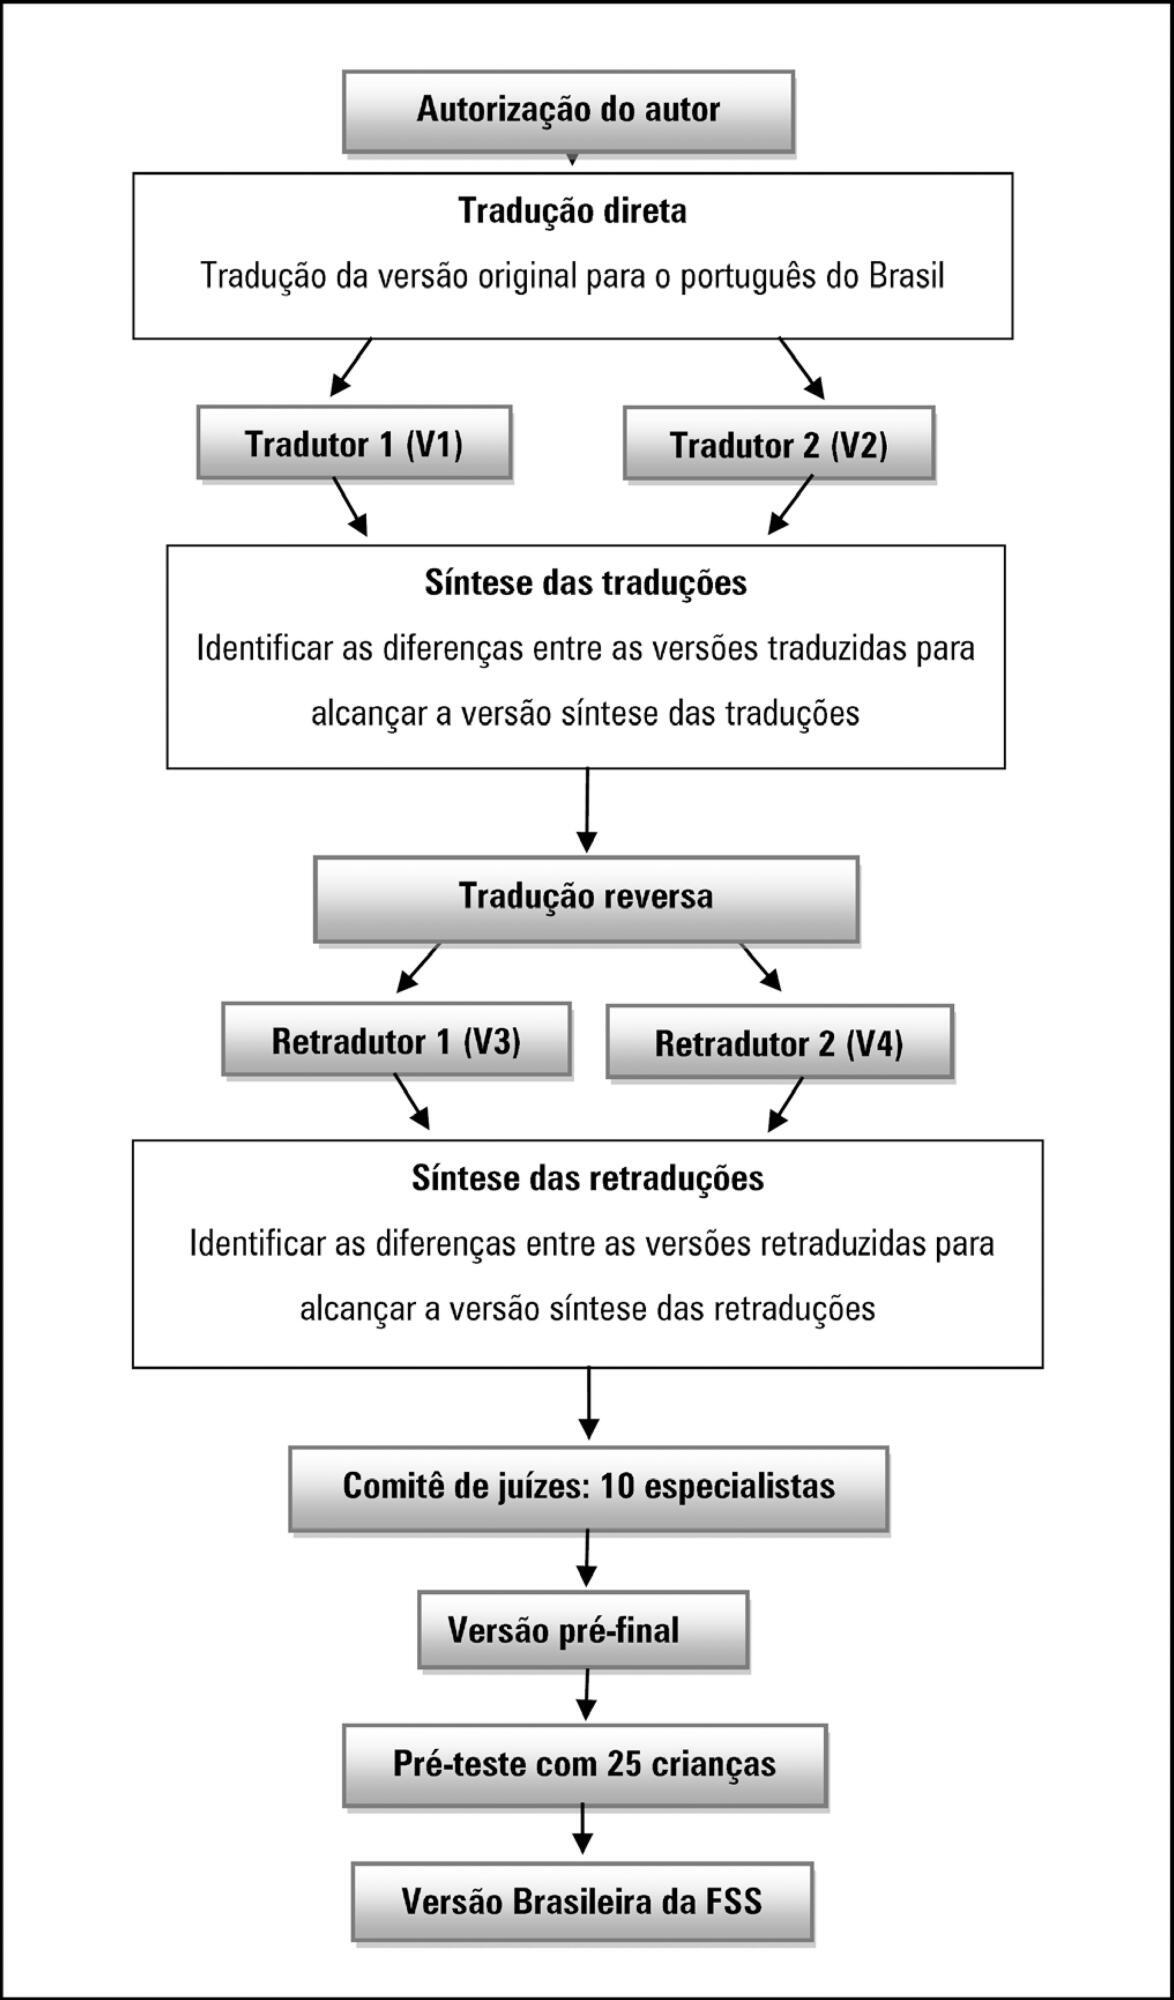 Brazilian version of the Pediatric Functional Status Scale: translation and cross-cultural adaptation